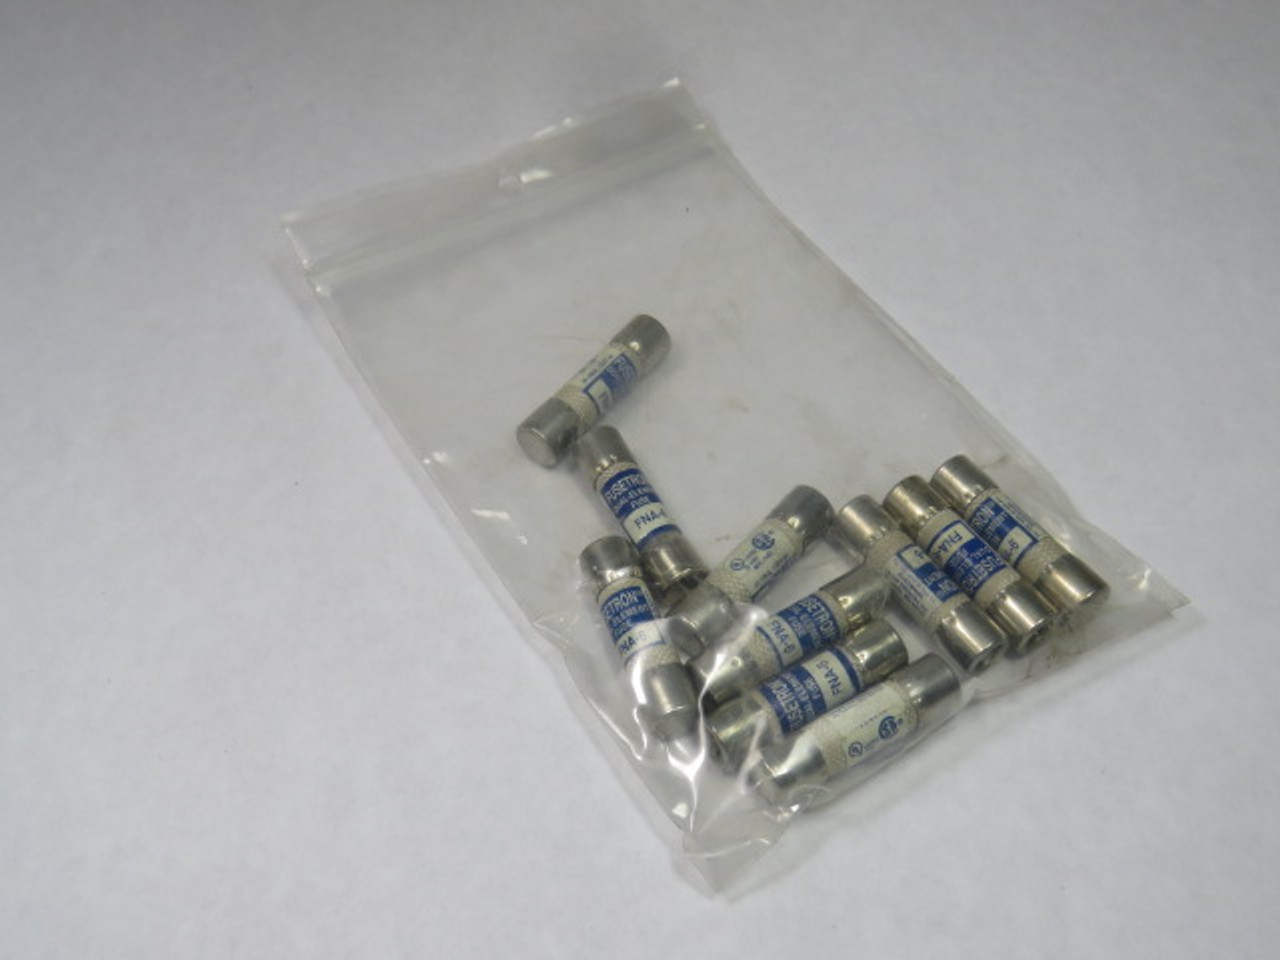 Fusetron FNA-6 Dual Element Fuse 6A 125V Lot of 10 USED